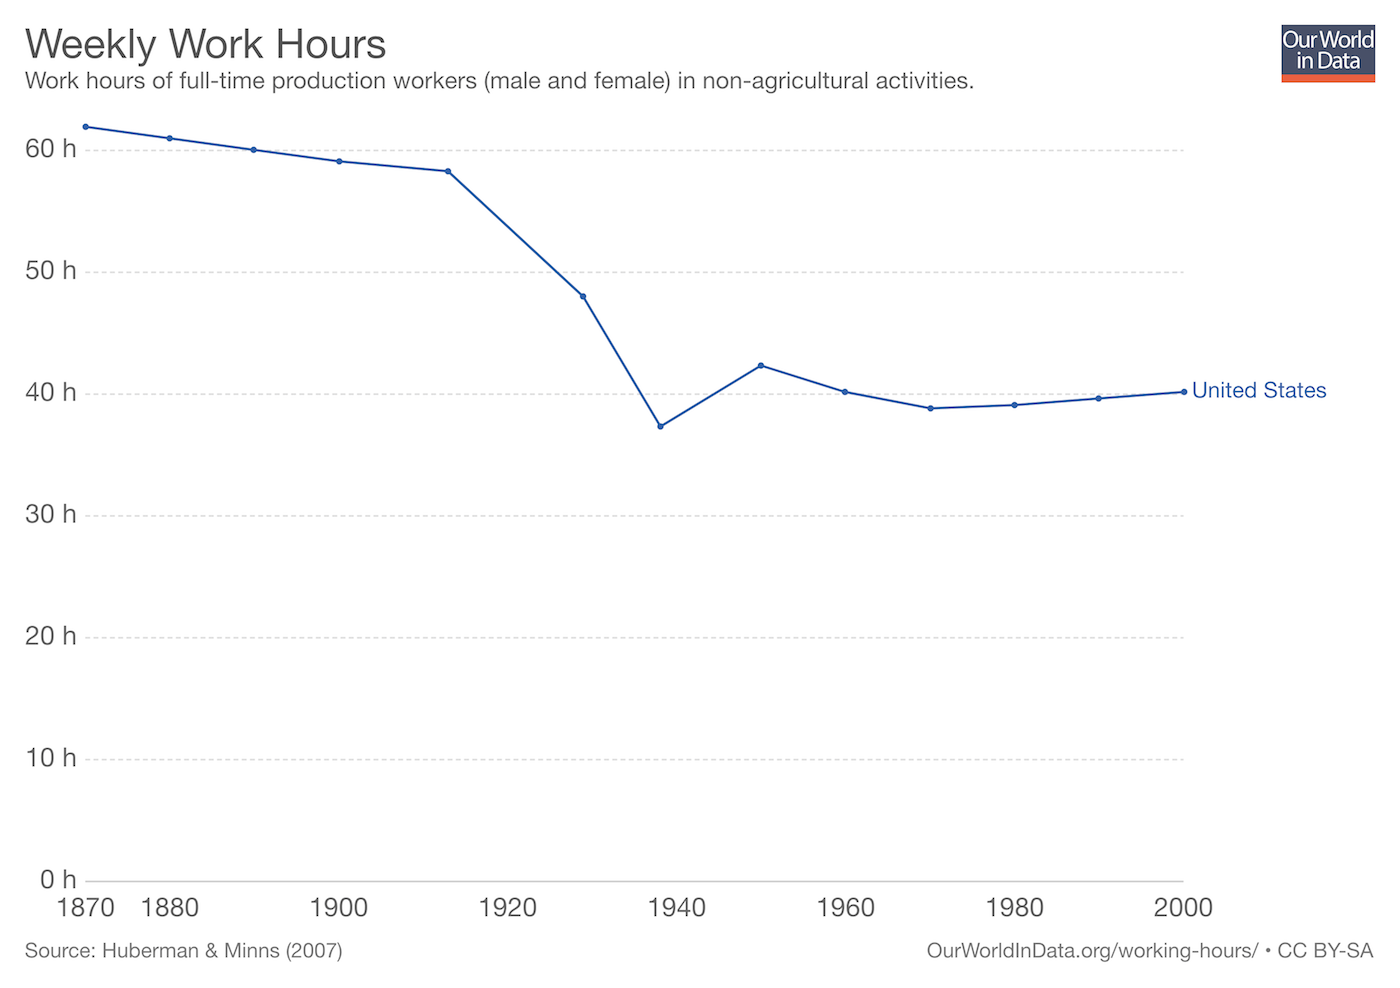 weekly work hours in the US